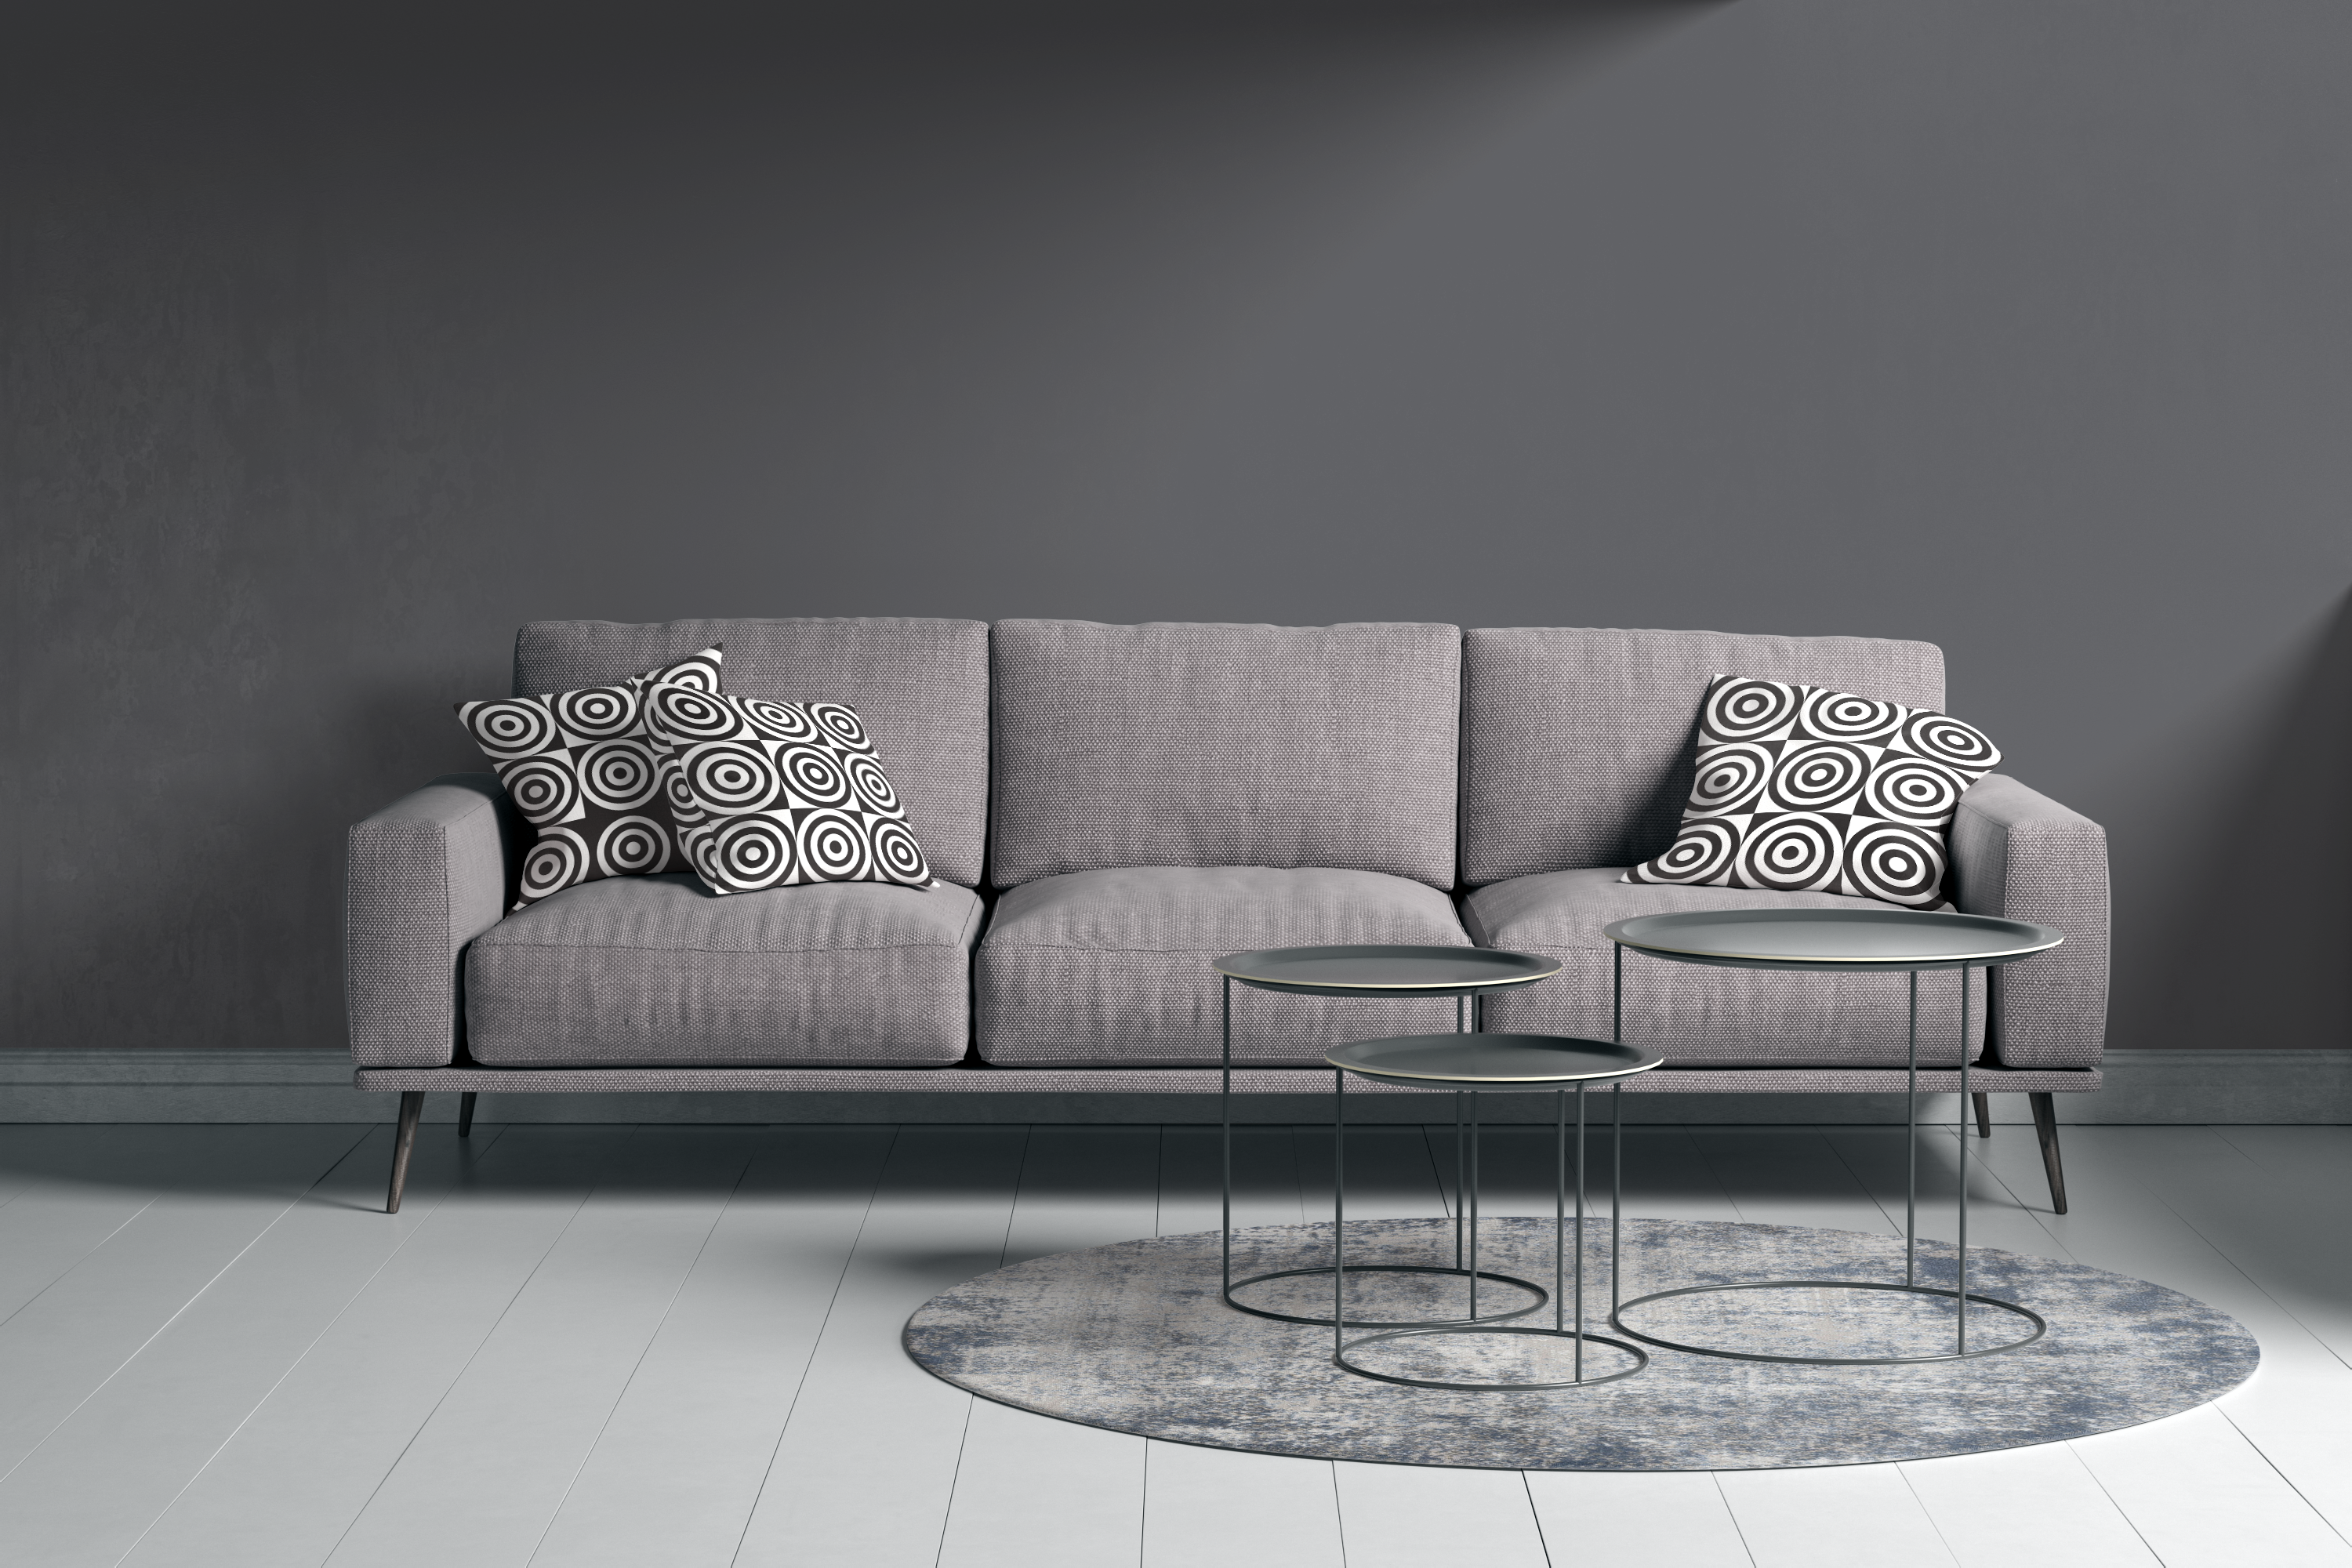 Living Room Mockup_Grey Couch 2-1